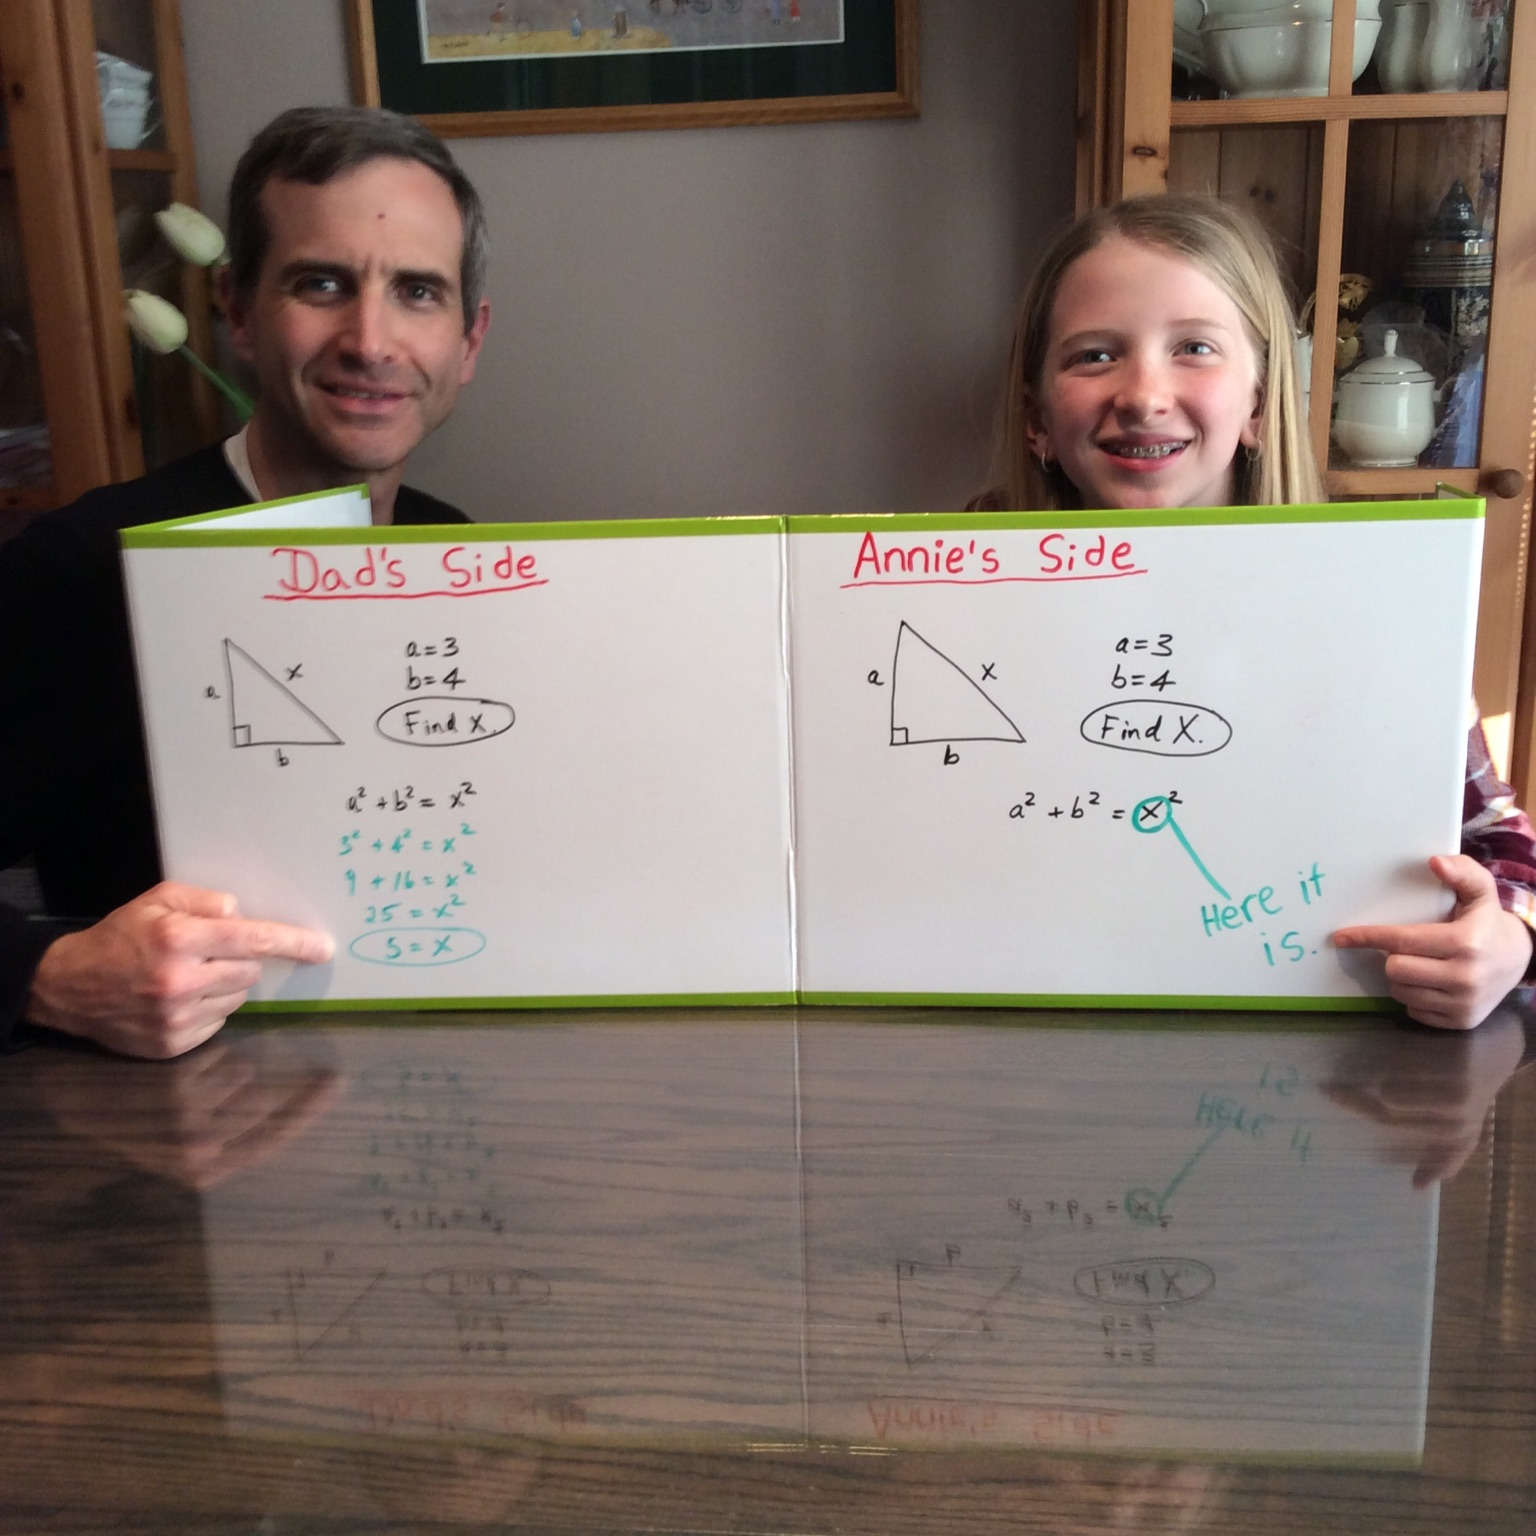 A father and daughter posing with whiteboards with math equations